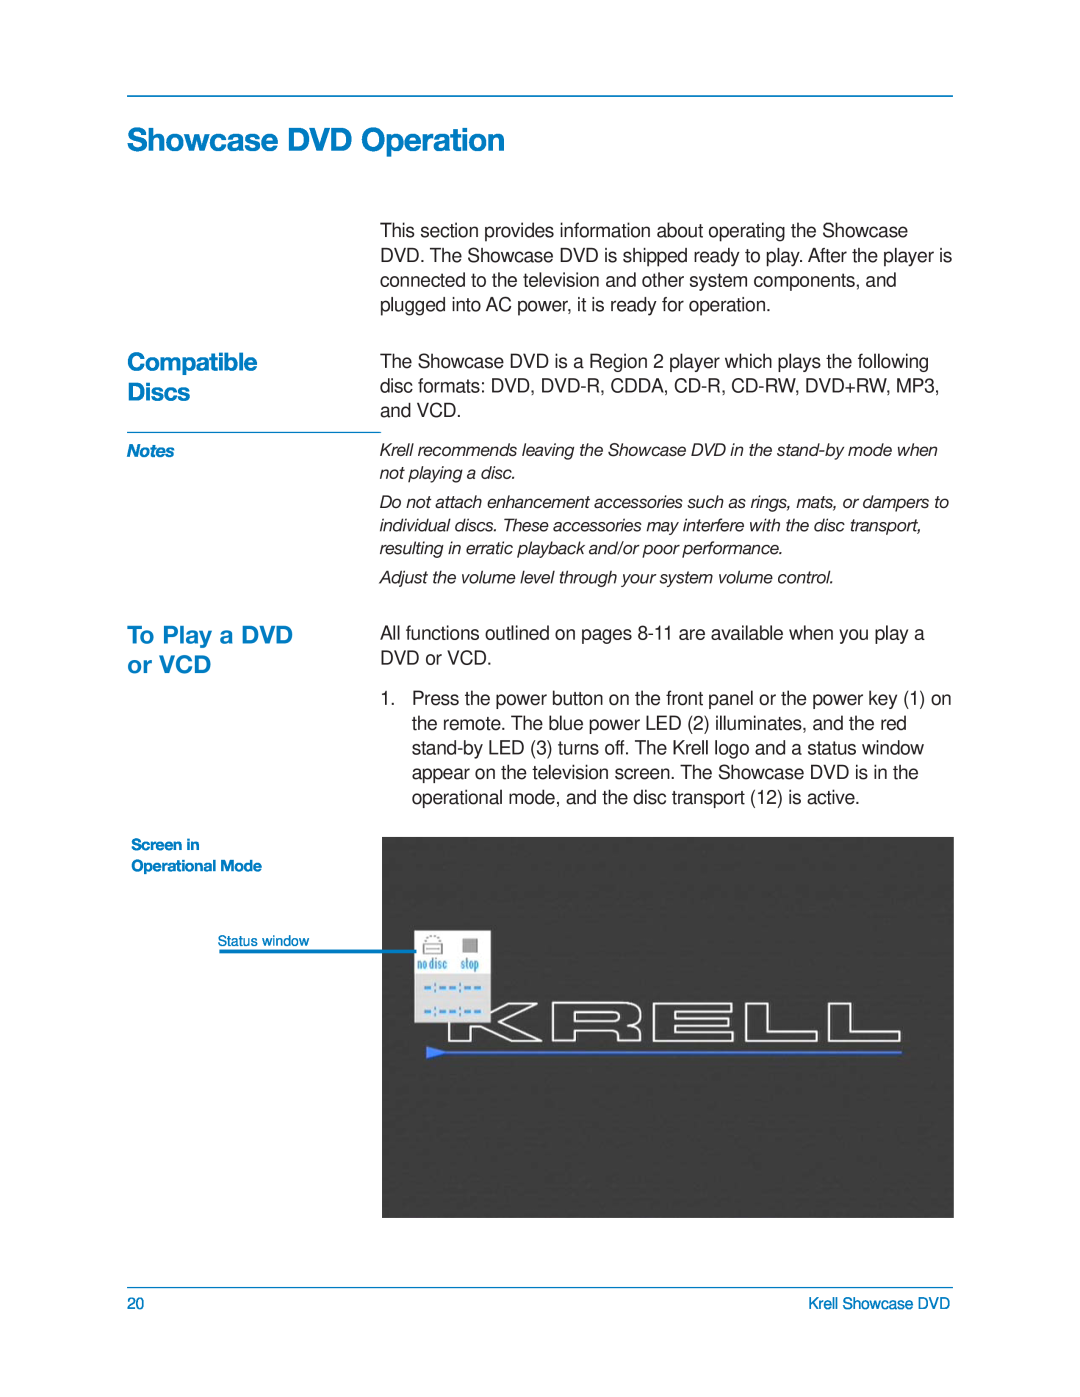 Krell Industries DVD Player manual Showcase DVD Operation, To Play a DVD or VCD, Compatible Discs 